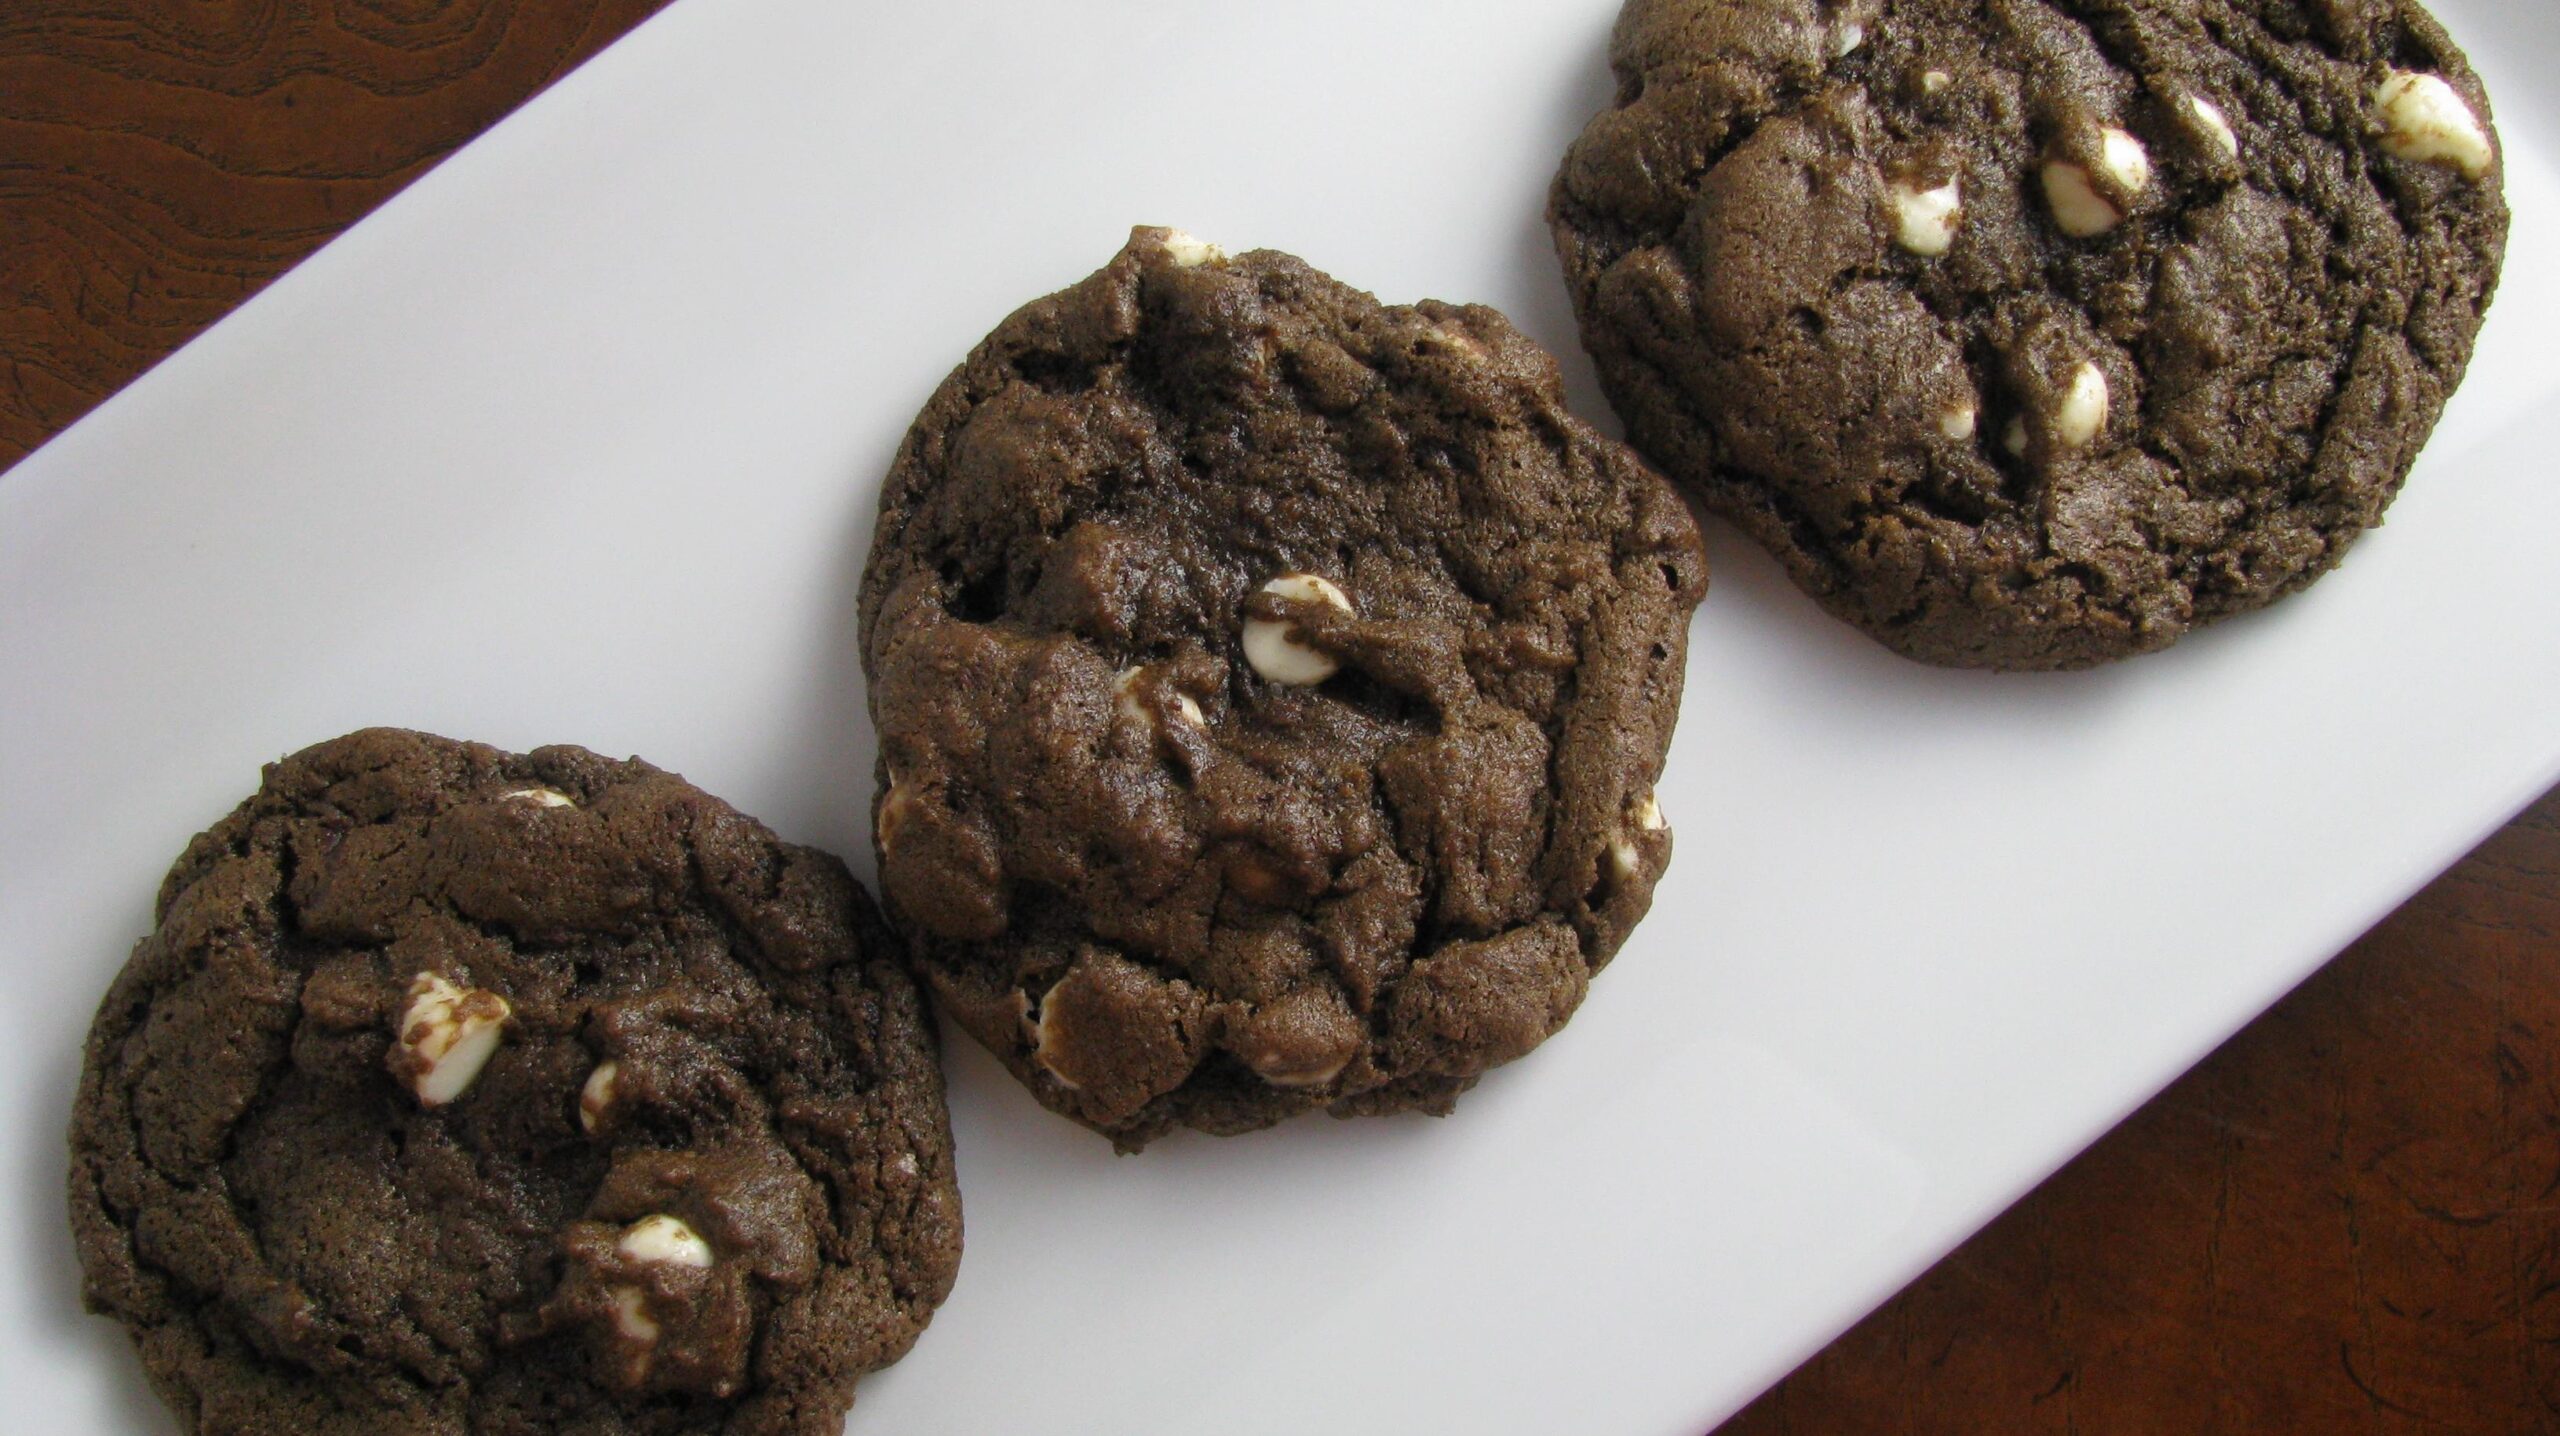  Who needs a morning coffee and pastry when you have these delicious cookies?